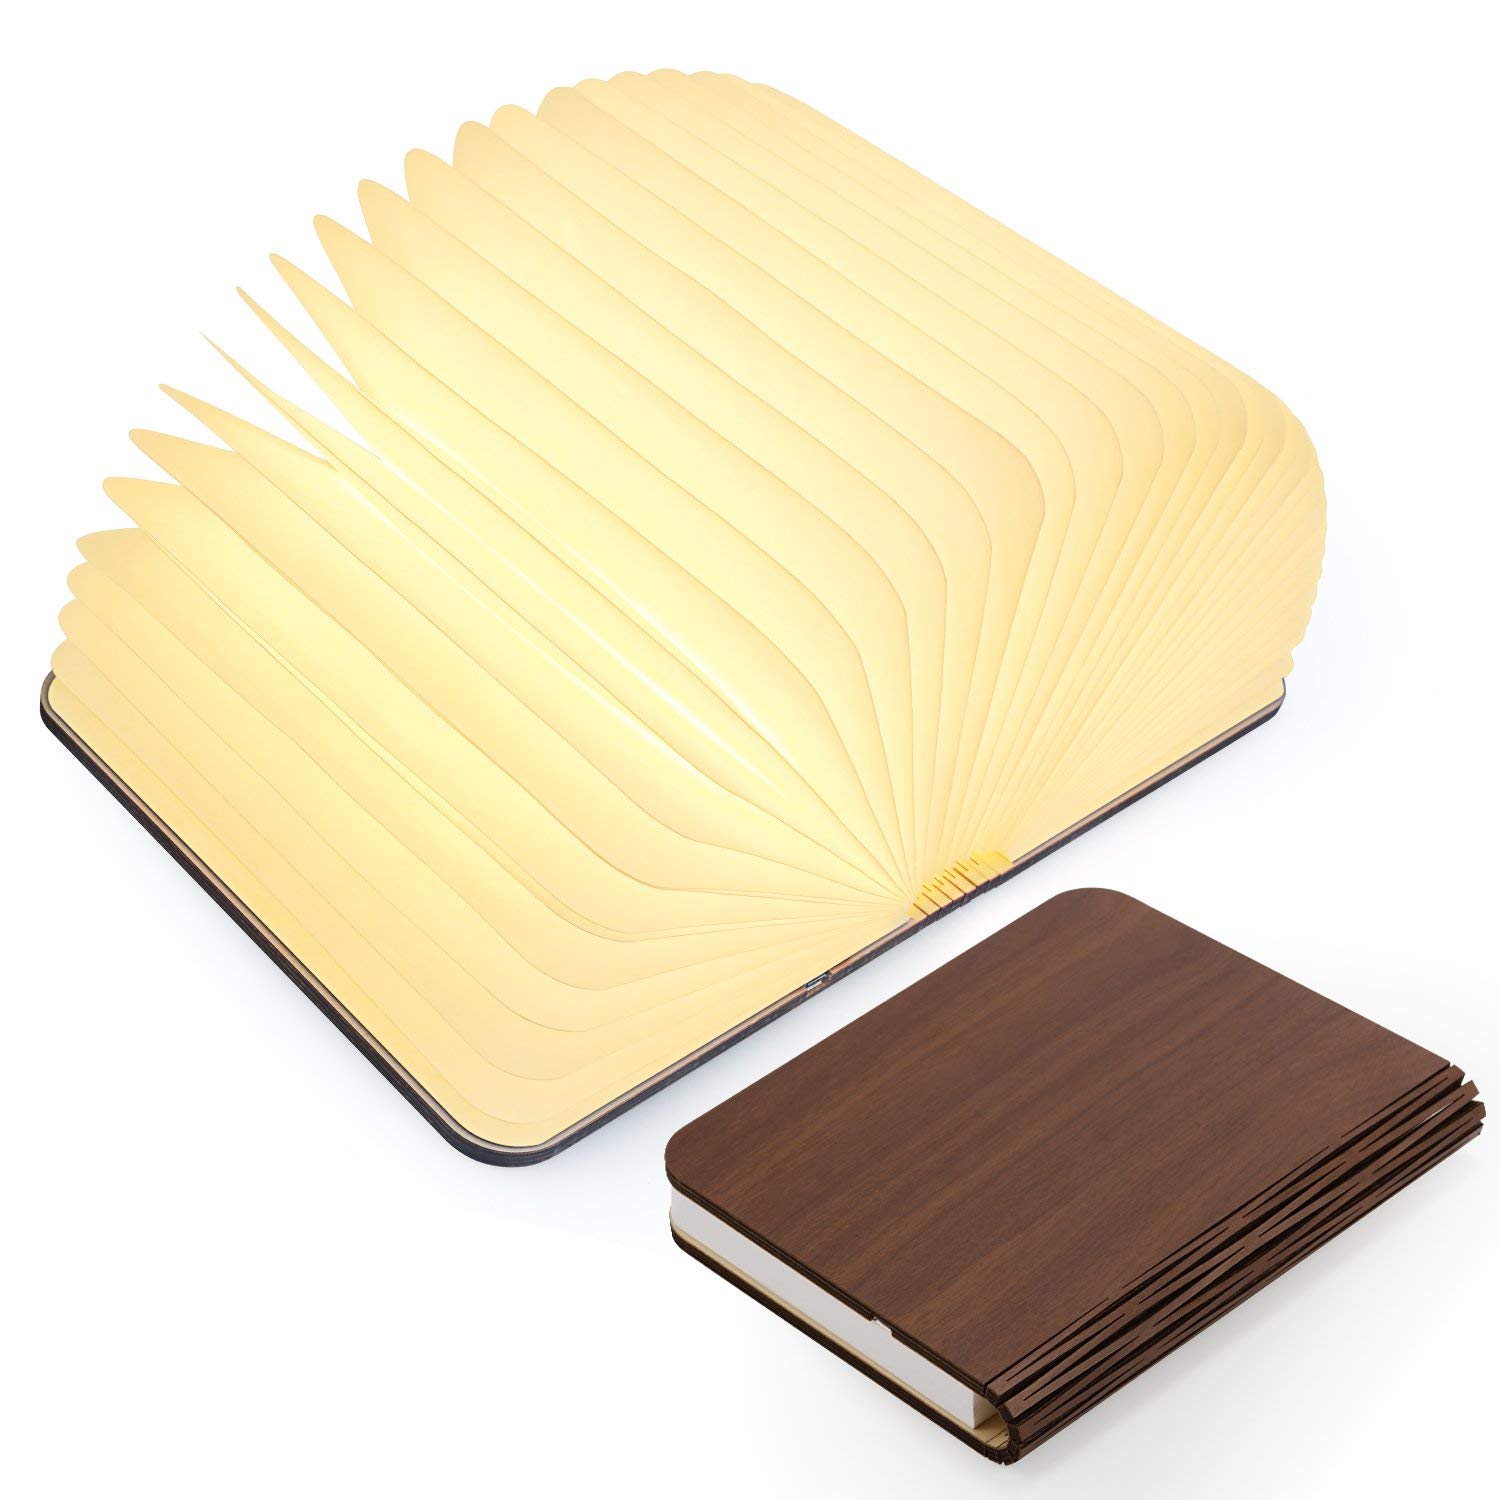 Wooden Folding Book Light, Magicfly USB Rechargable Book Shaped ...